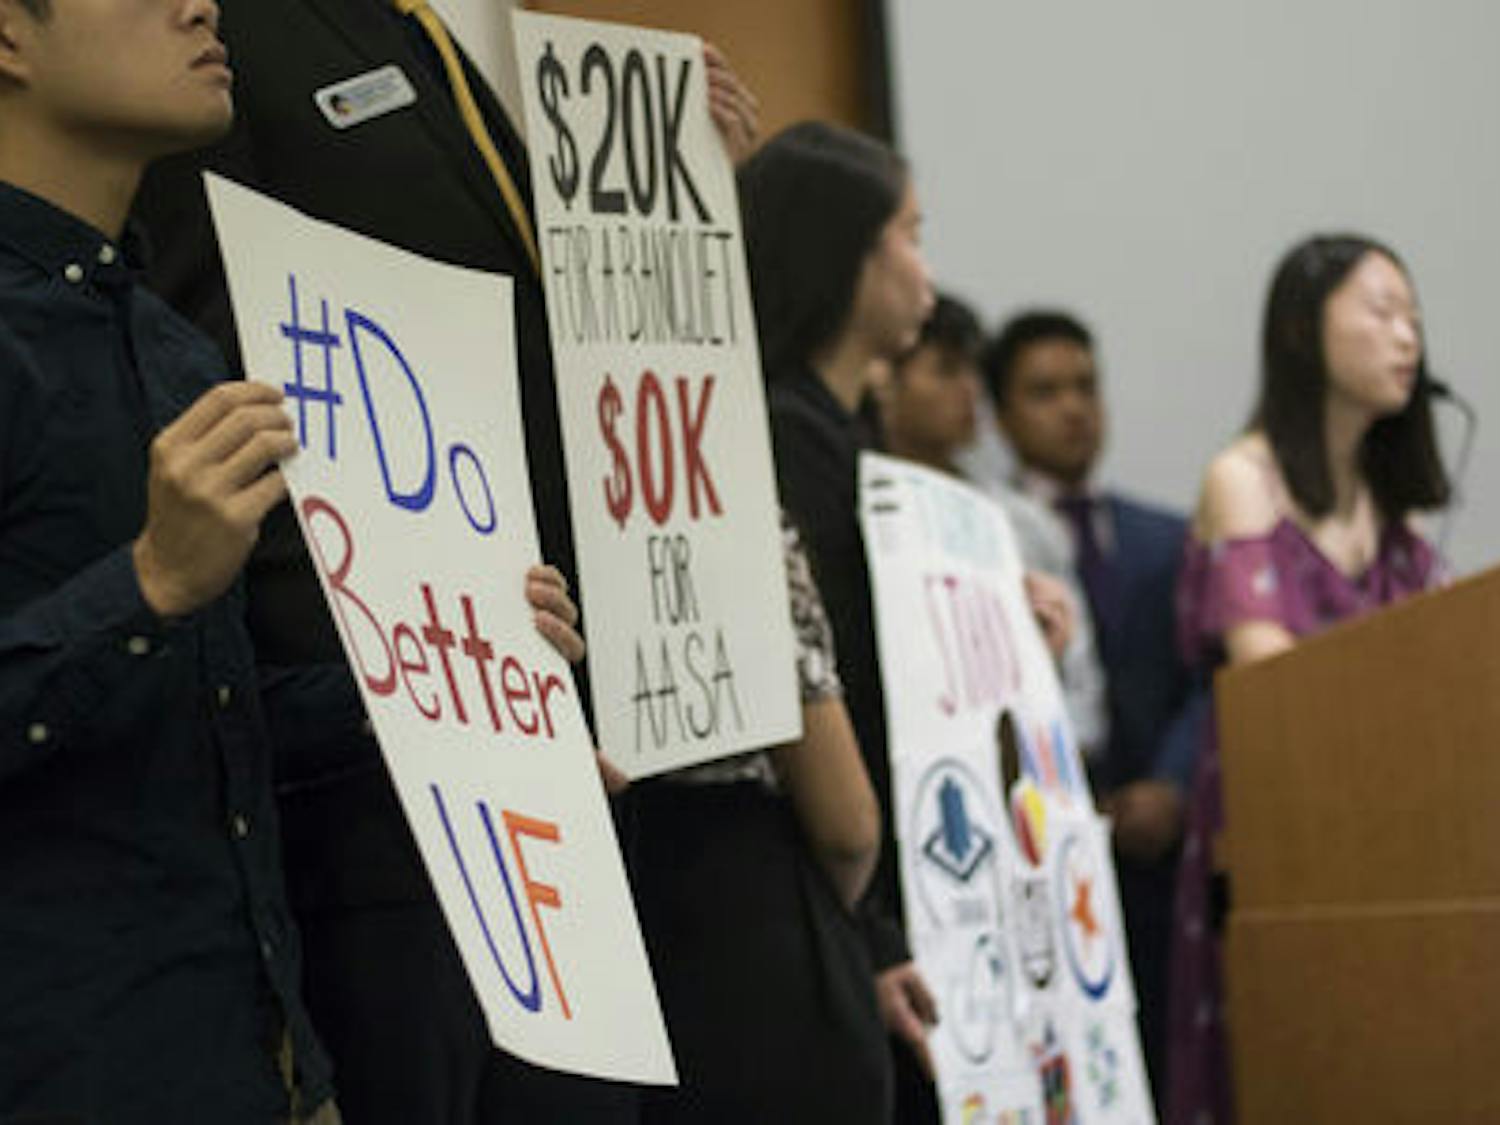 Khanh Hoang, 20, holds a protest sign alongside other protesters while Wenxin Song speaks during a Student Government Senate meeting in the Reitz chamber room Tuesday evening. Song is the Internal Vice President for the Korean Undergraduate Student Association. “It’s more than just a show,” Song said. “It is our tradition and our legacy here.”